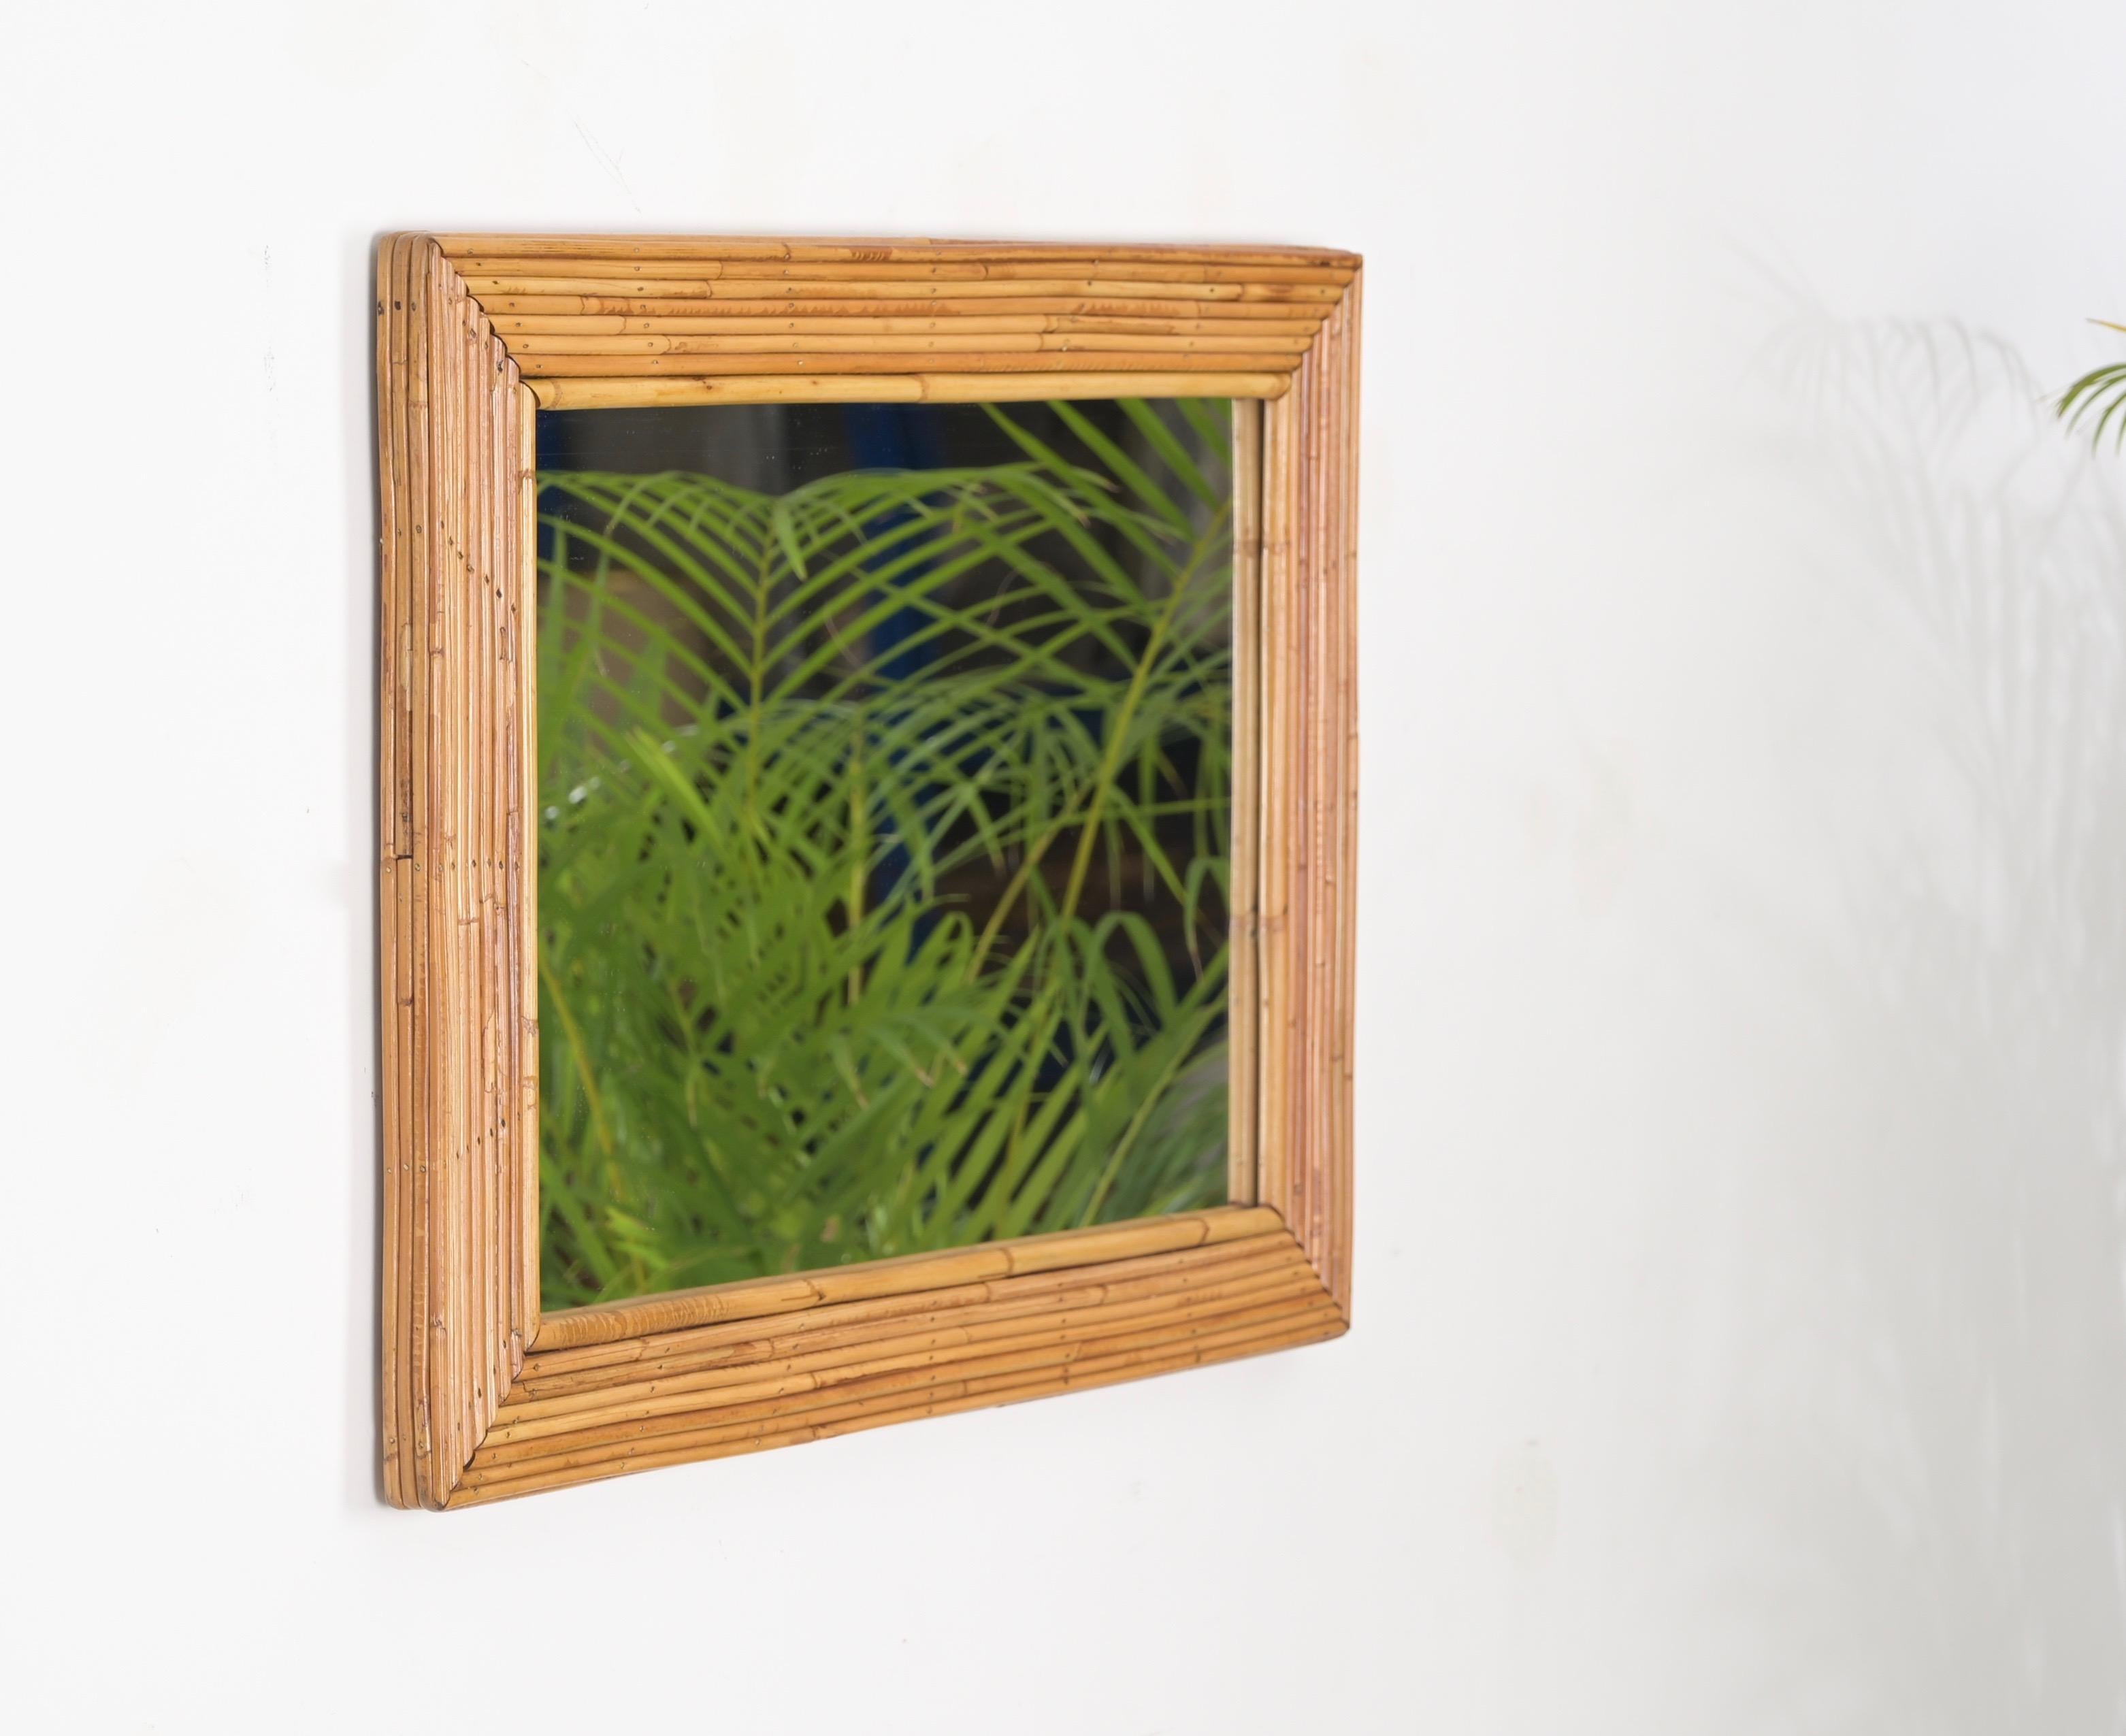 Mid-Century Rectangular Bamboo and Rattan Mirror by Vivai del Sud, Italy 1960s For Sale 2